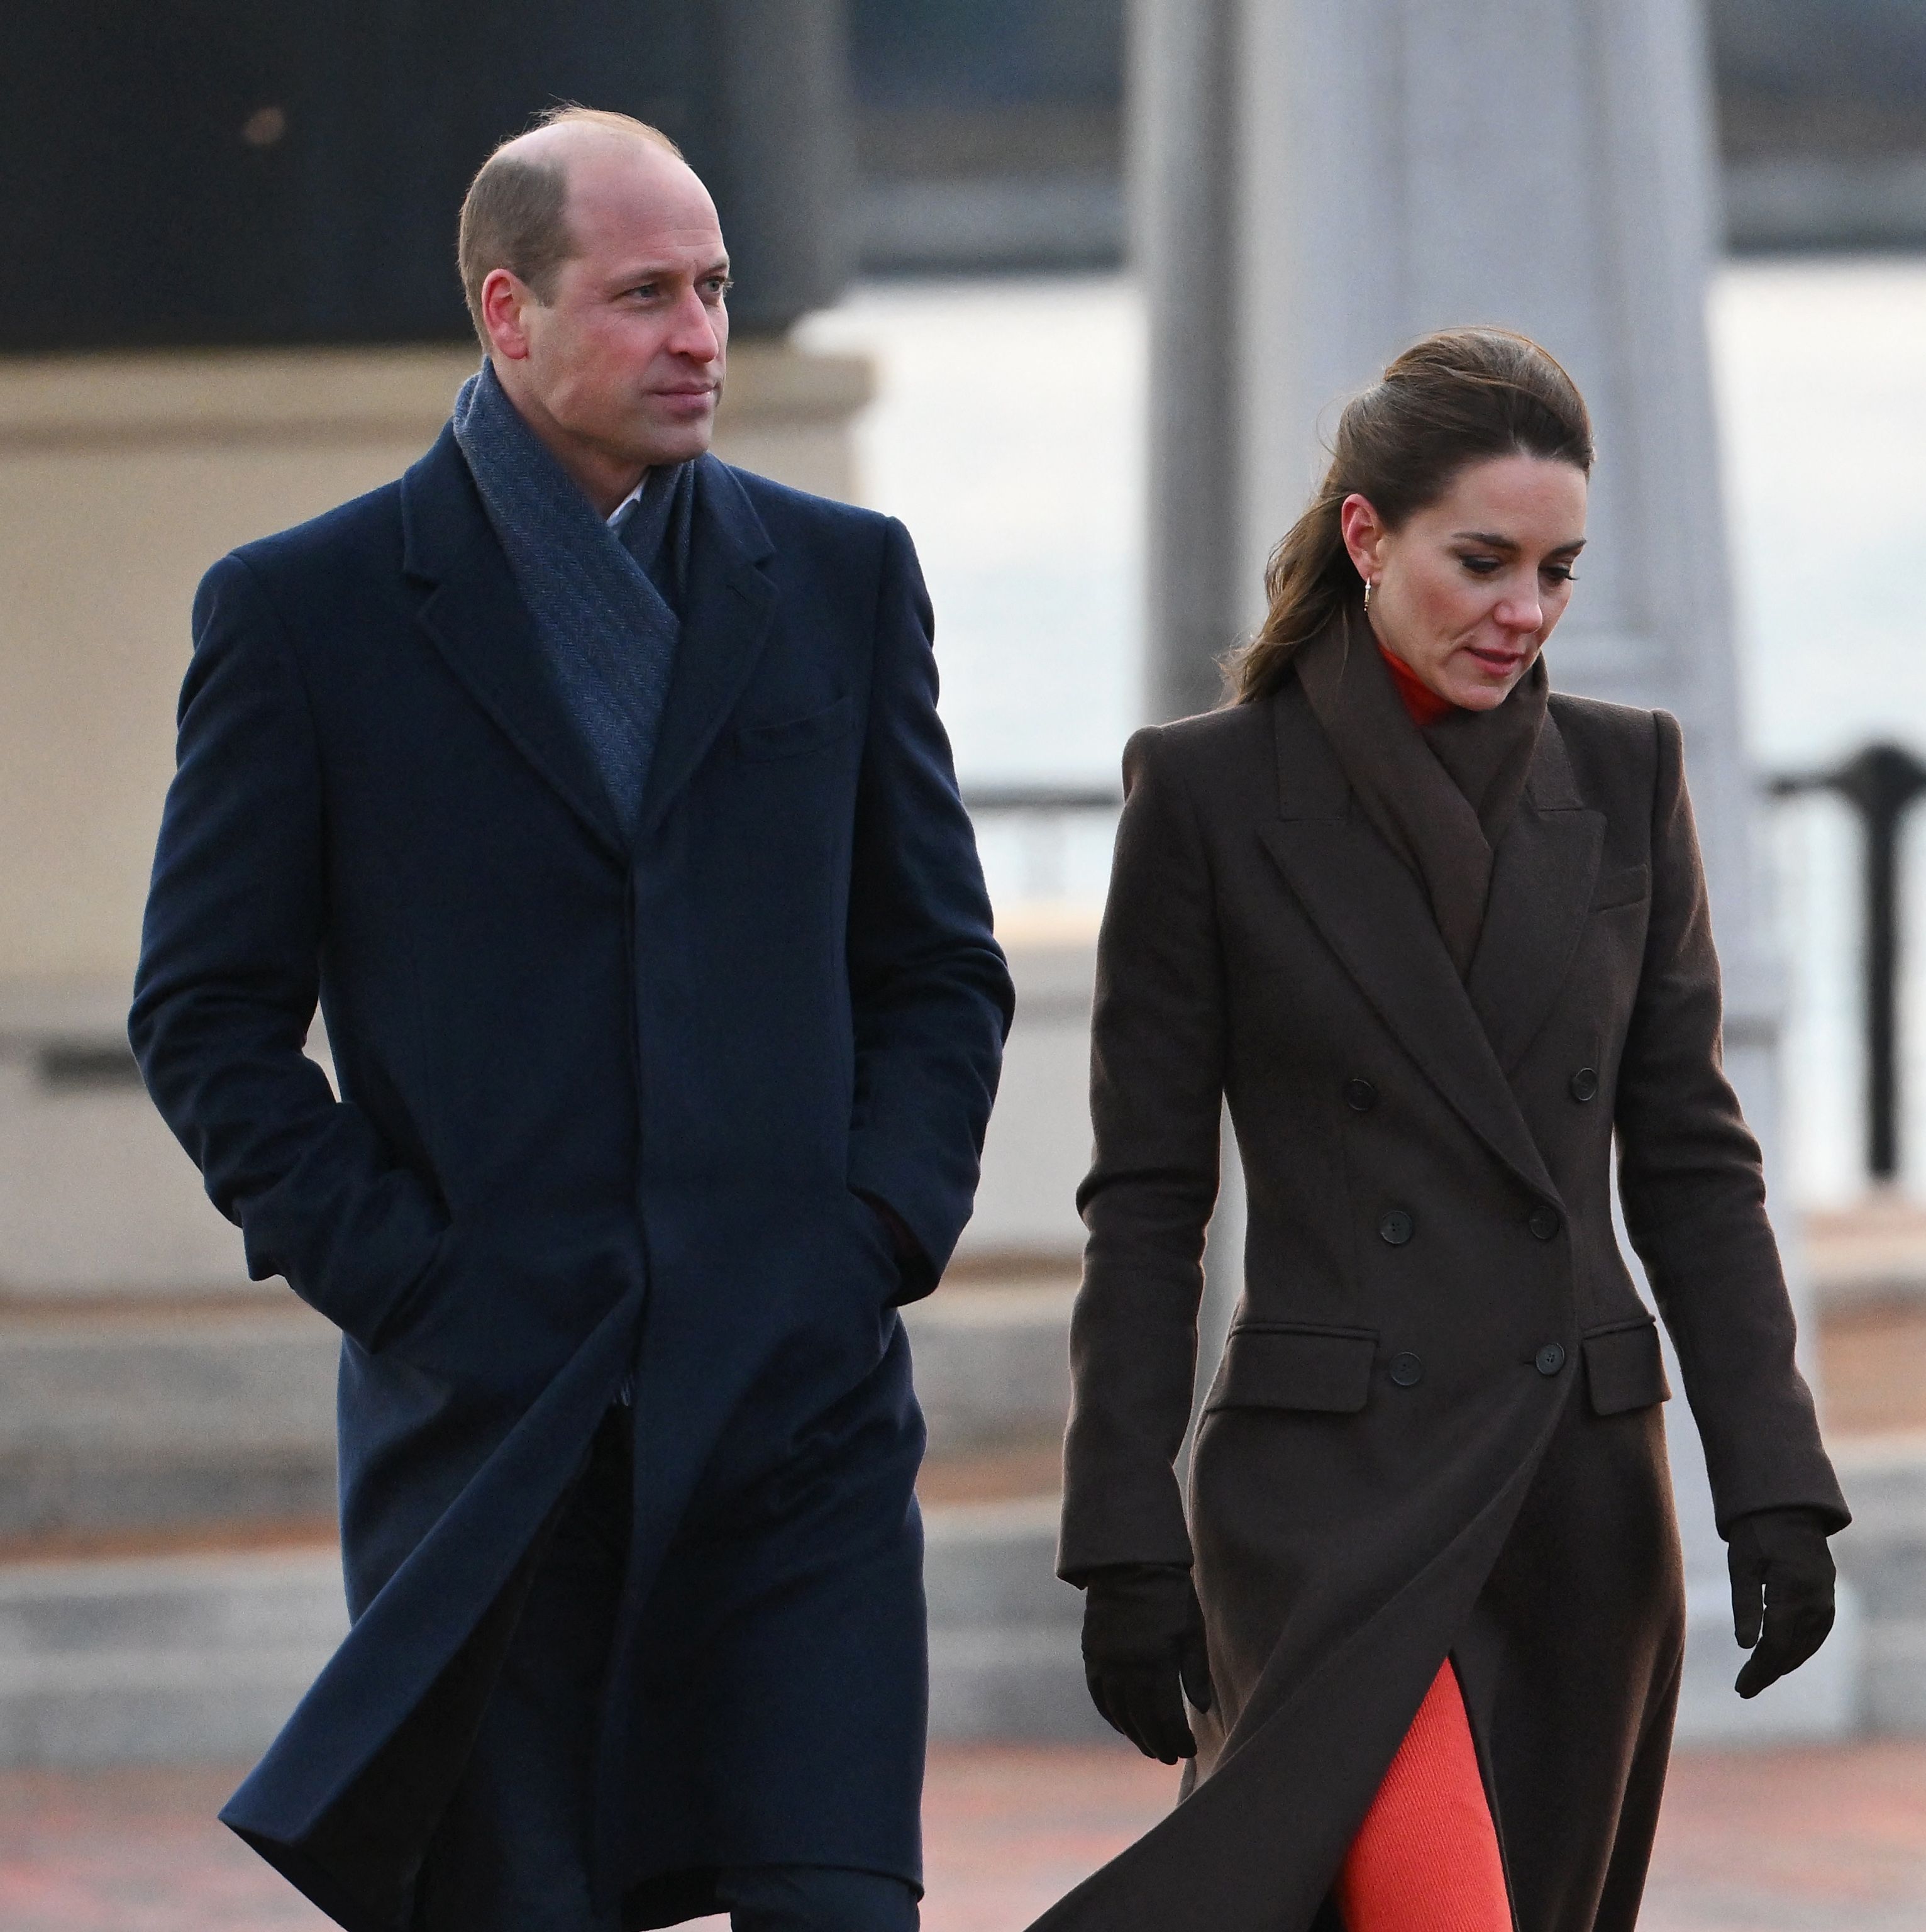 What Kate Middleton and Prince William Were Doing Instead of Watching the Sussexes' Docuseries